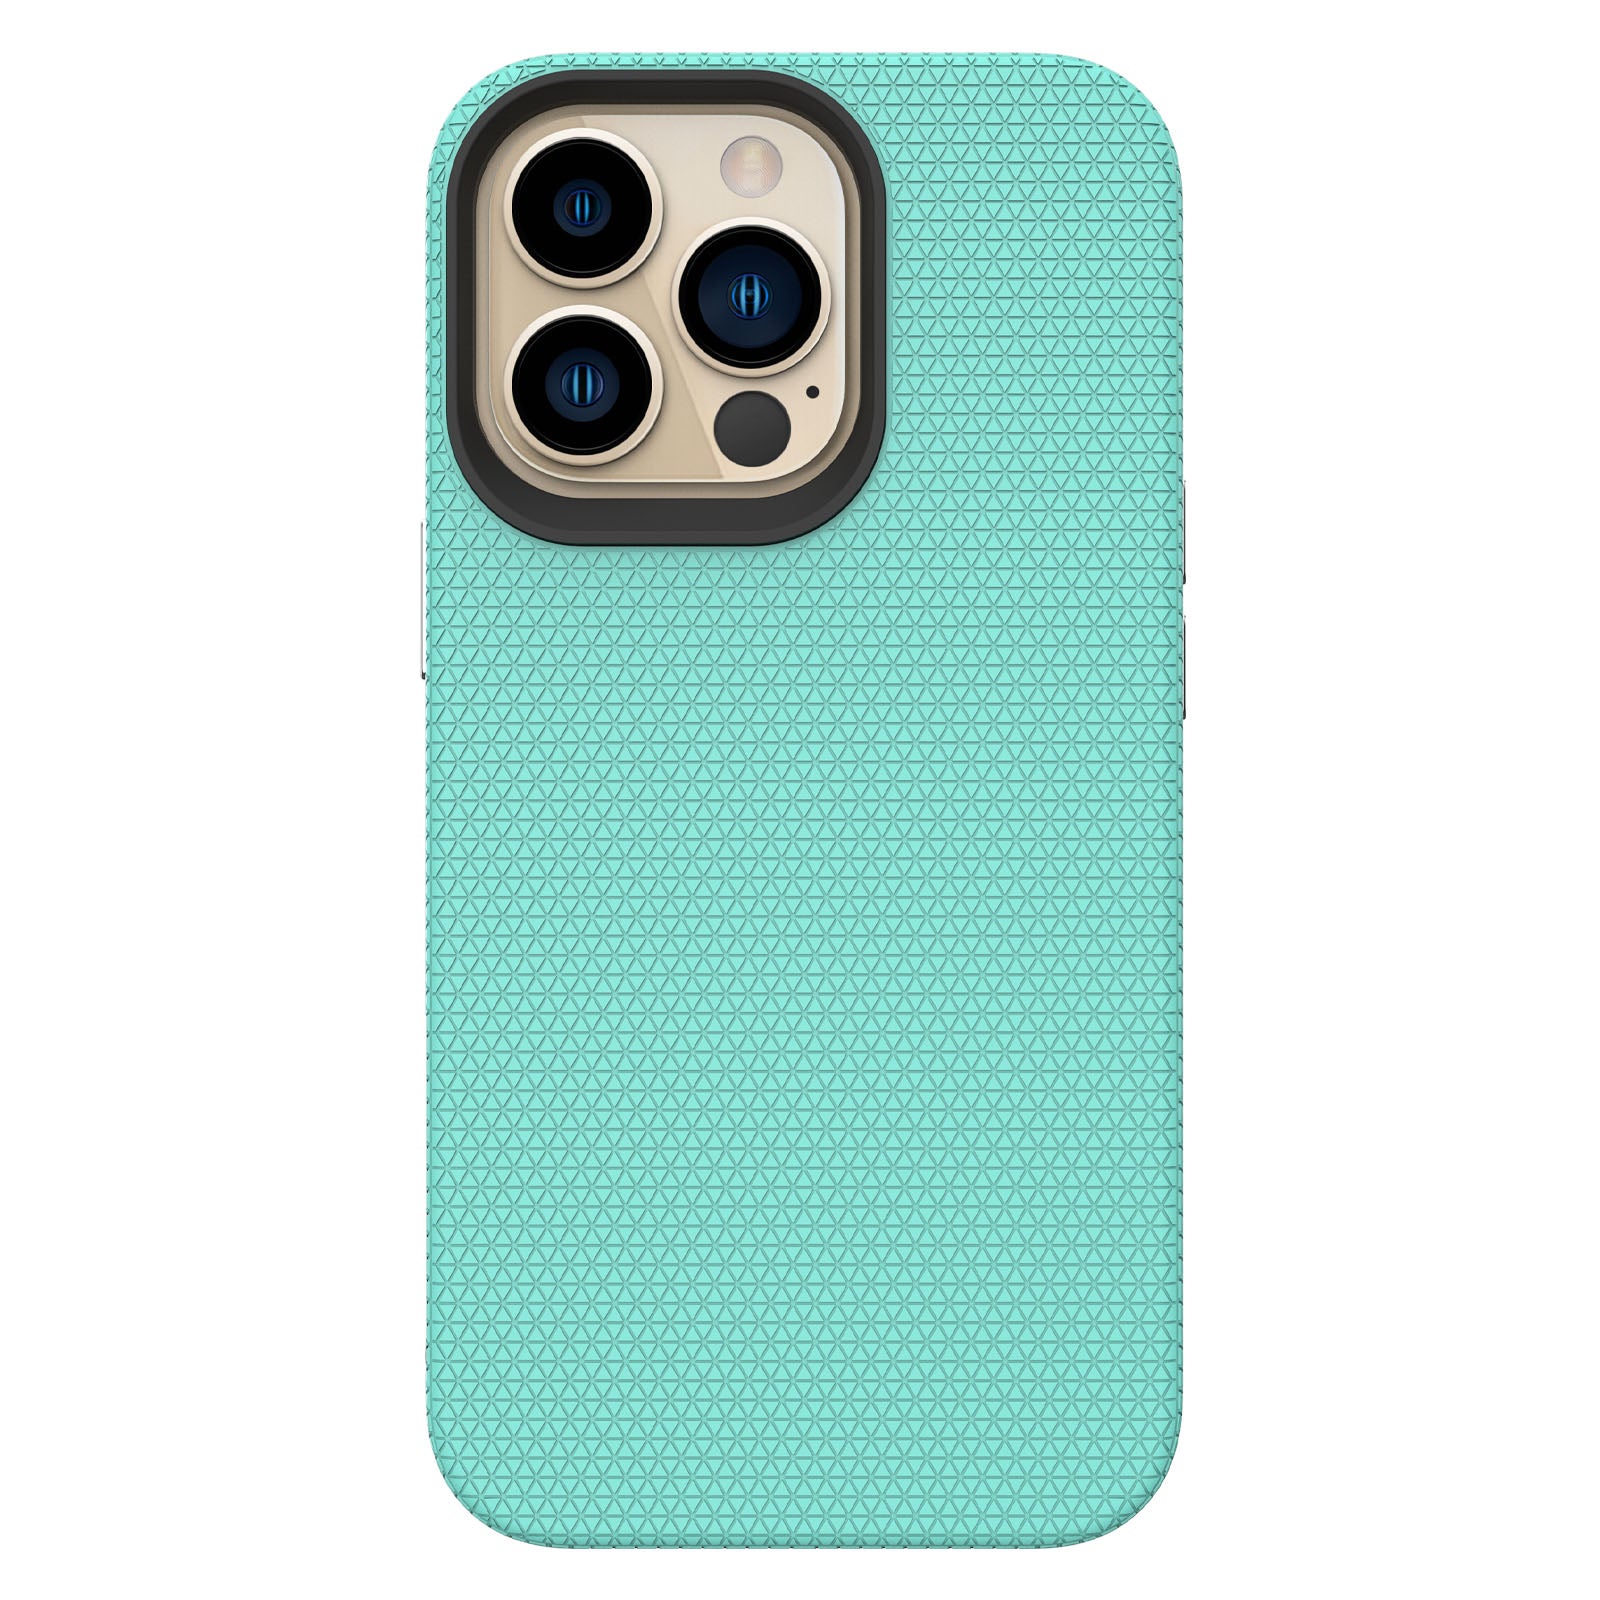 ZEOS Sphinx Dual Layer Case for iPhone 13 Pro Max